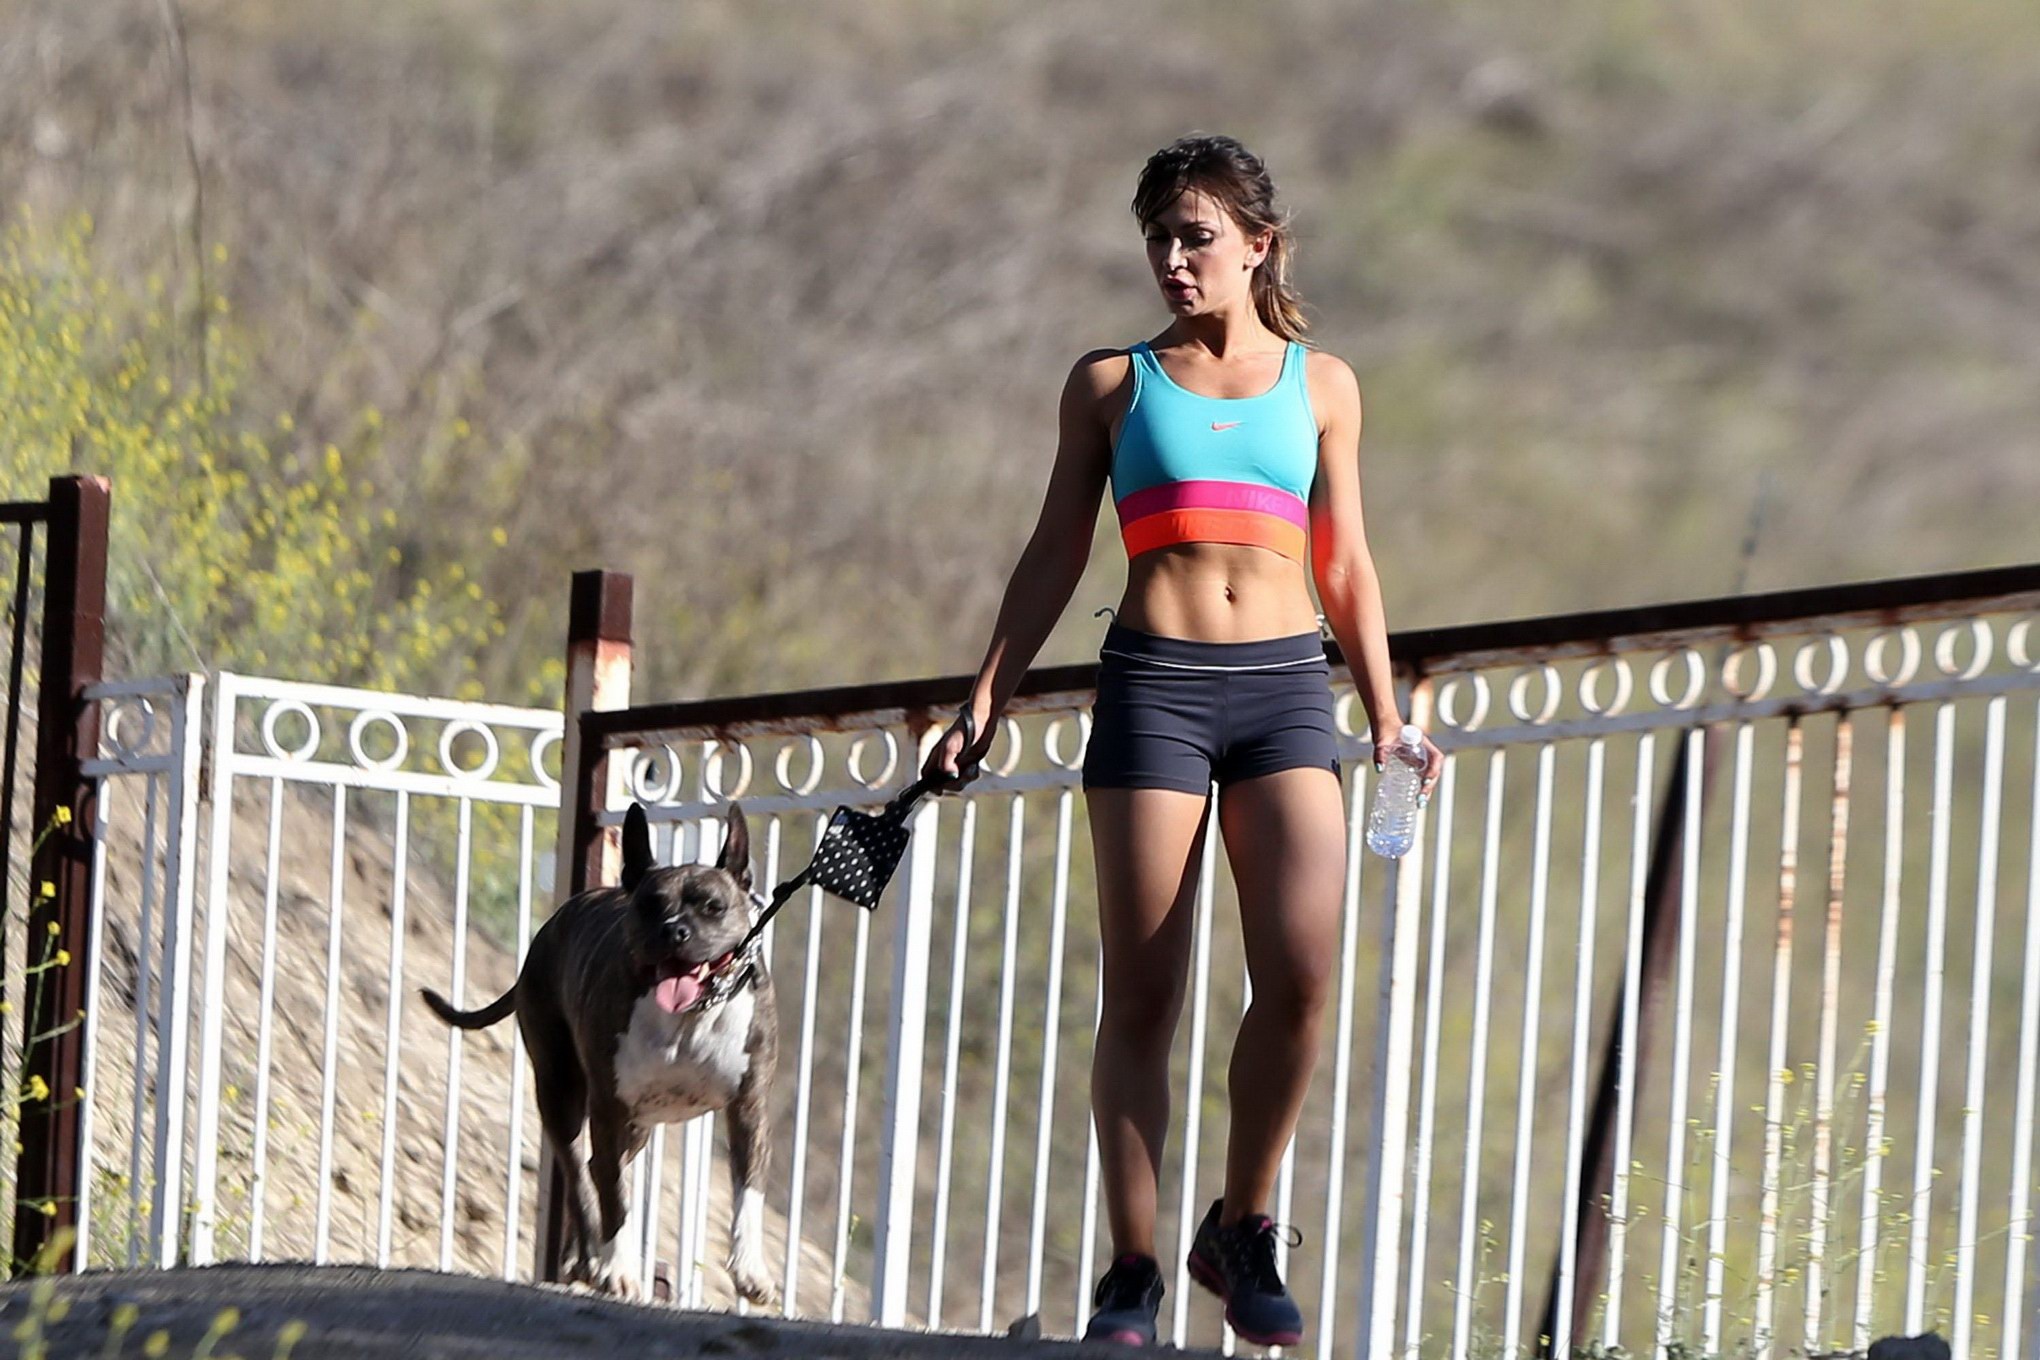 Karina Smirnoff in sports bra and shorts hiking with a dog at the park in LA #75196785